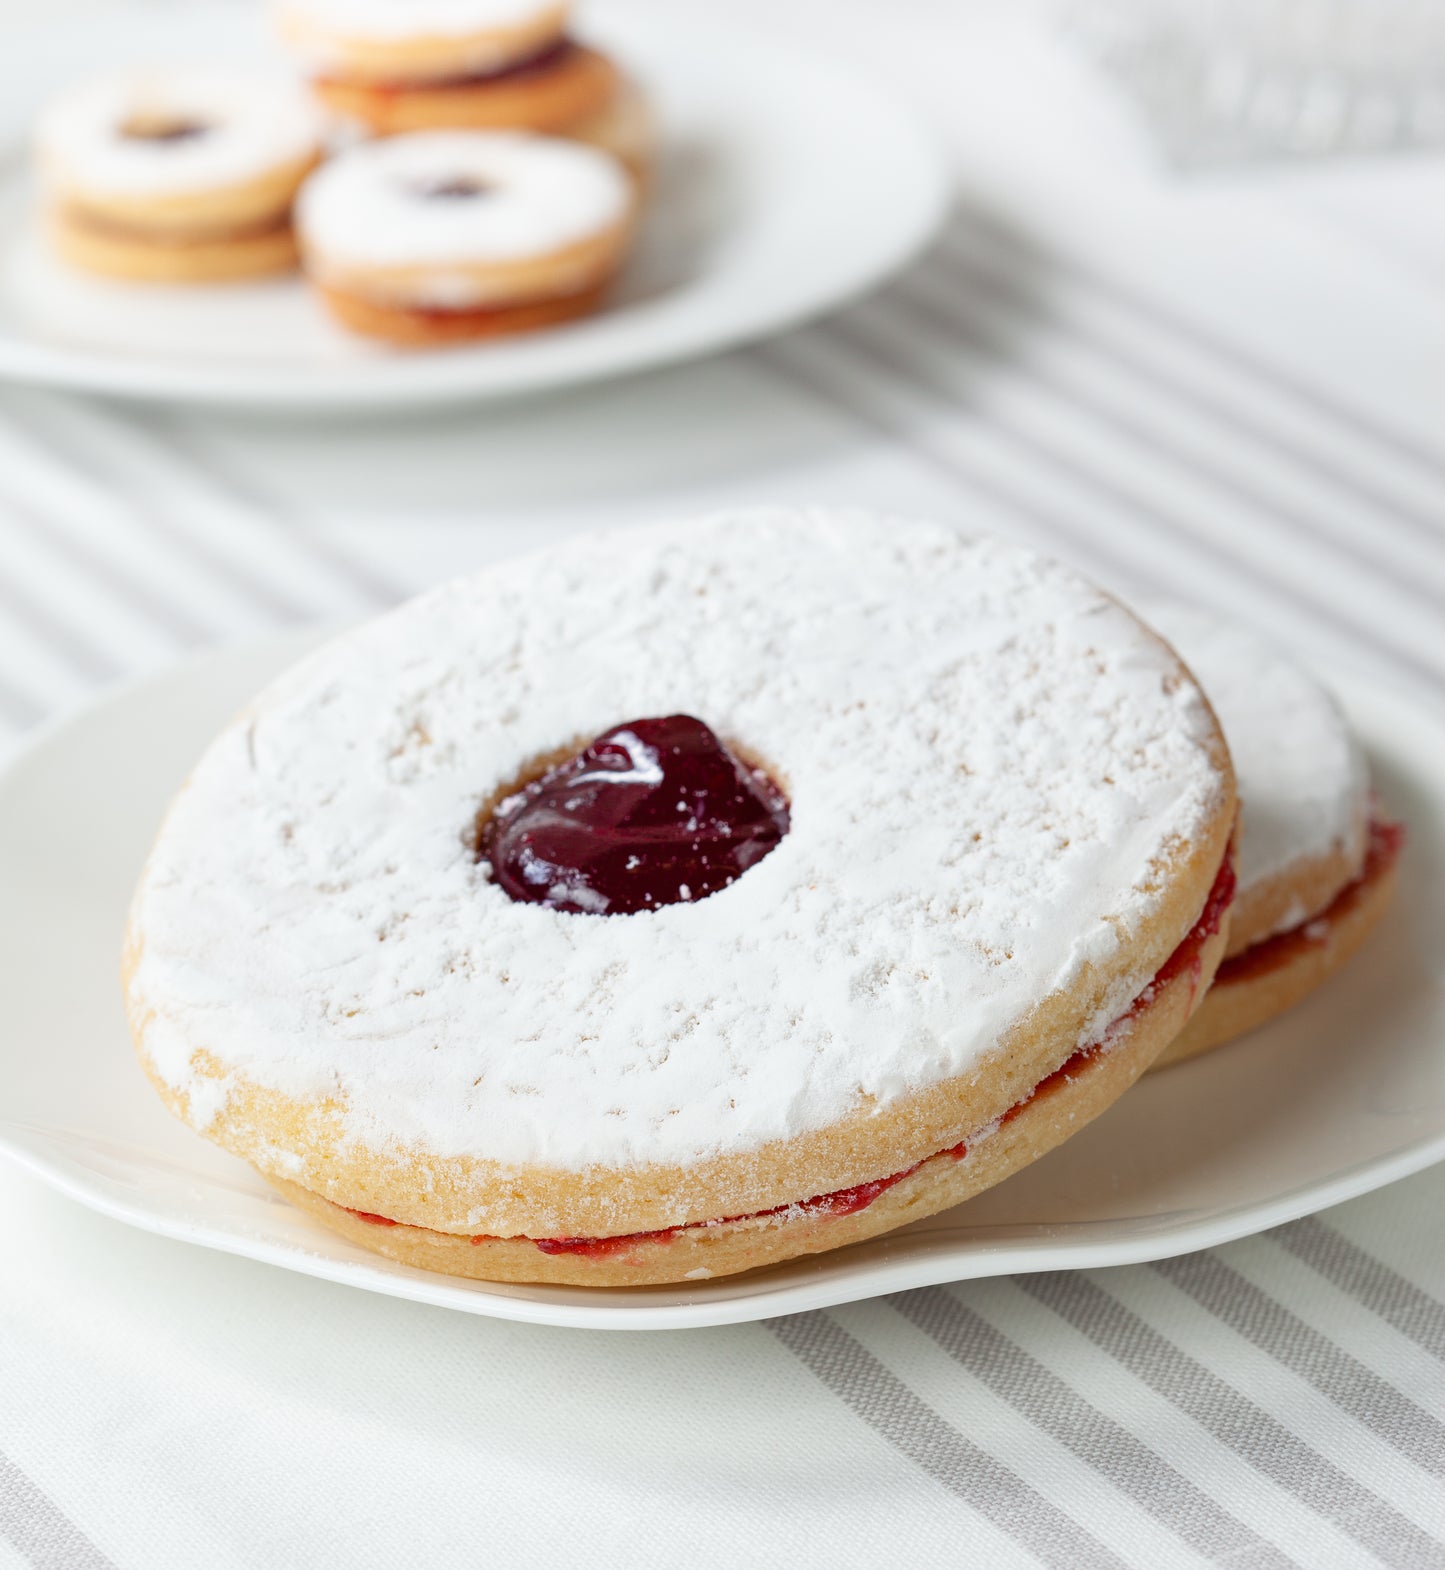 Large and smal Linzer tarts filled with raspberry jam on plates on a striped table cloth